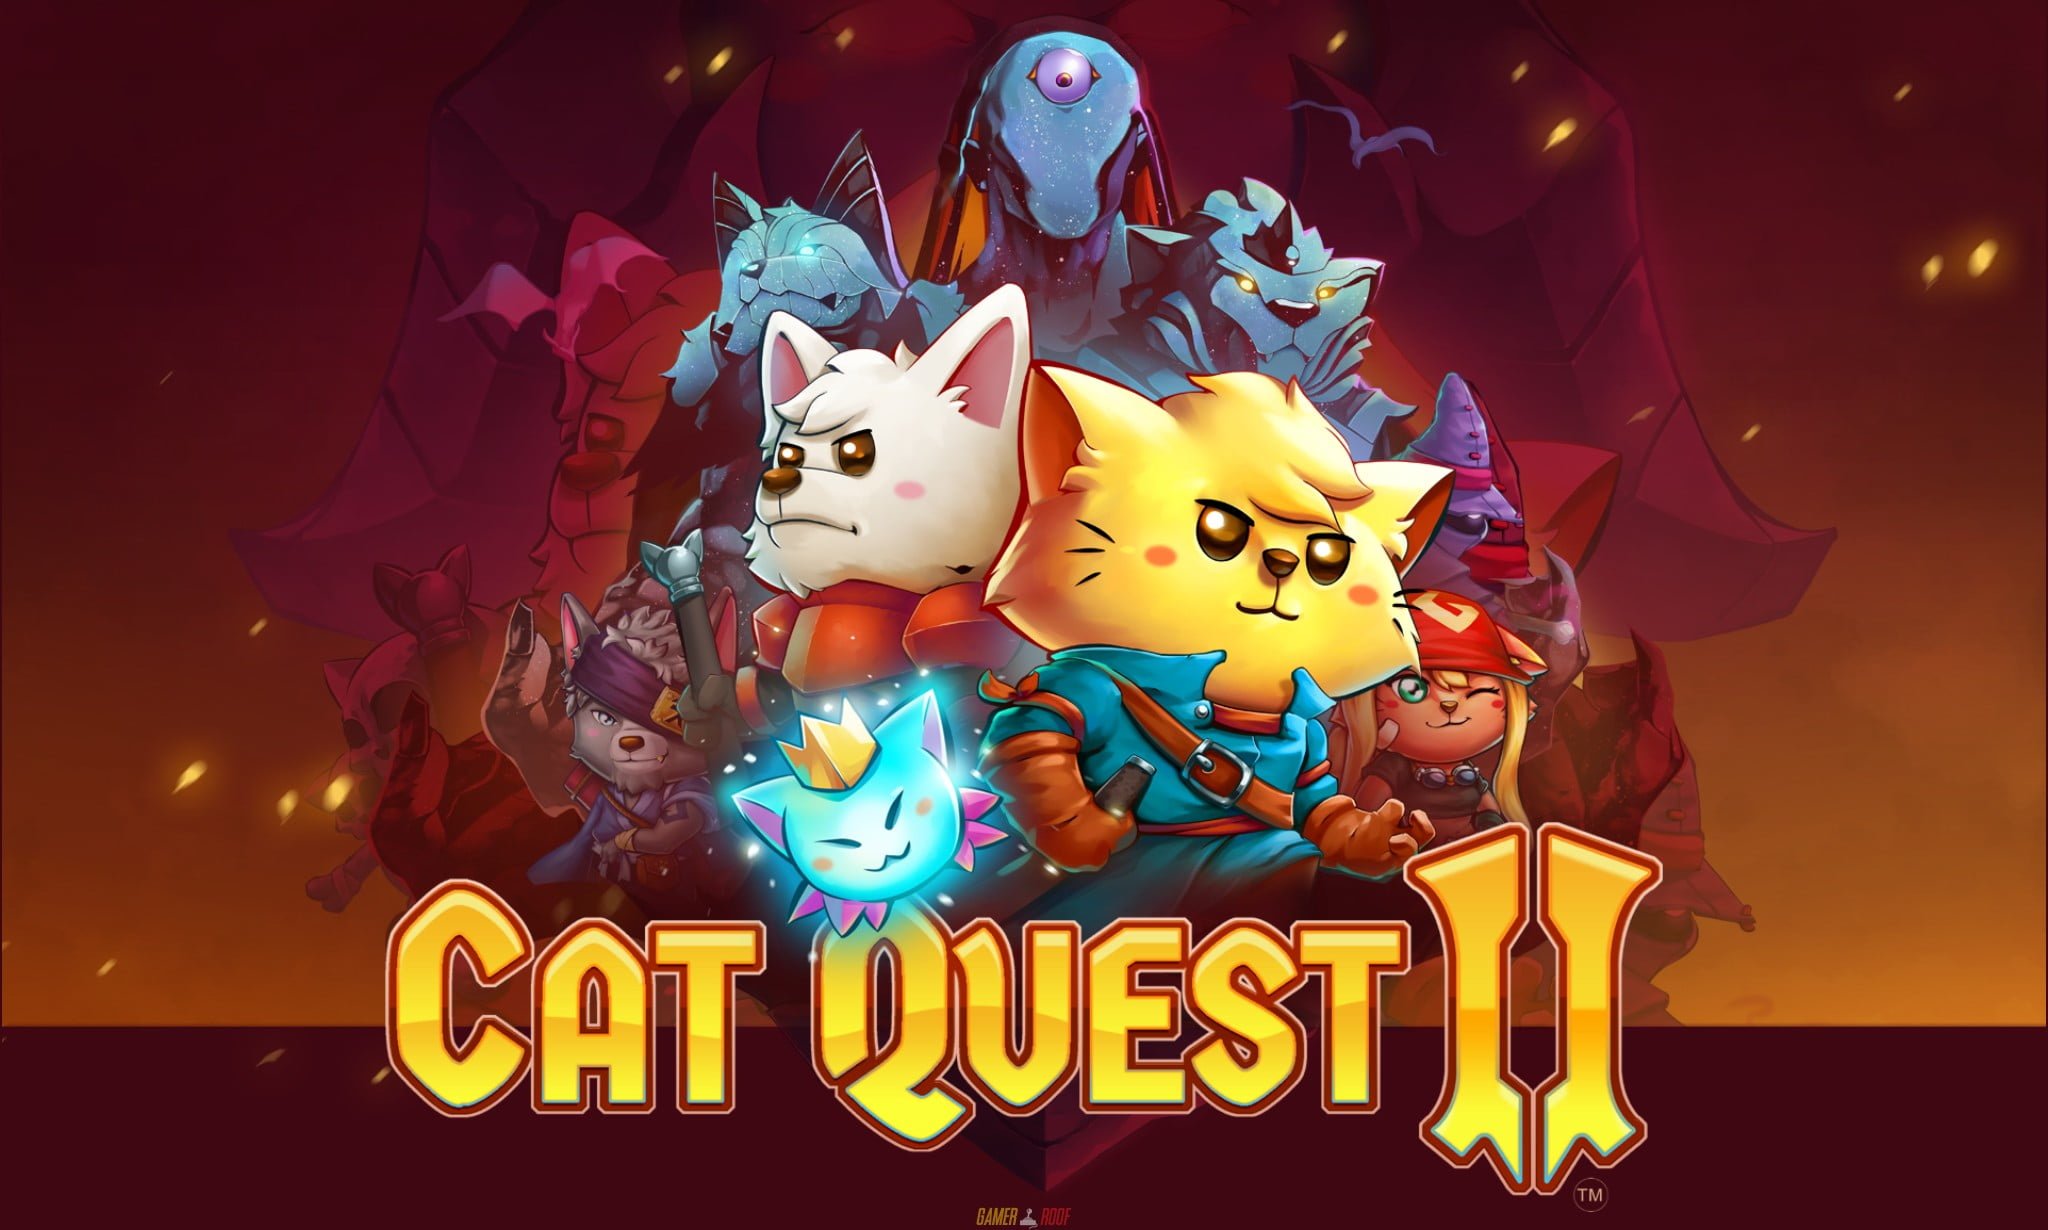 Cat quest free download android